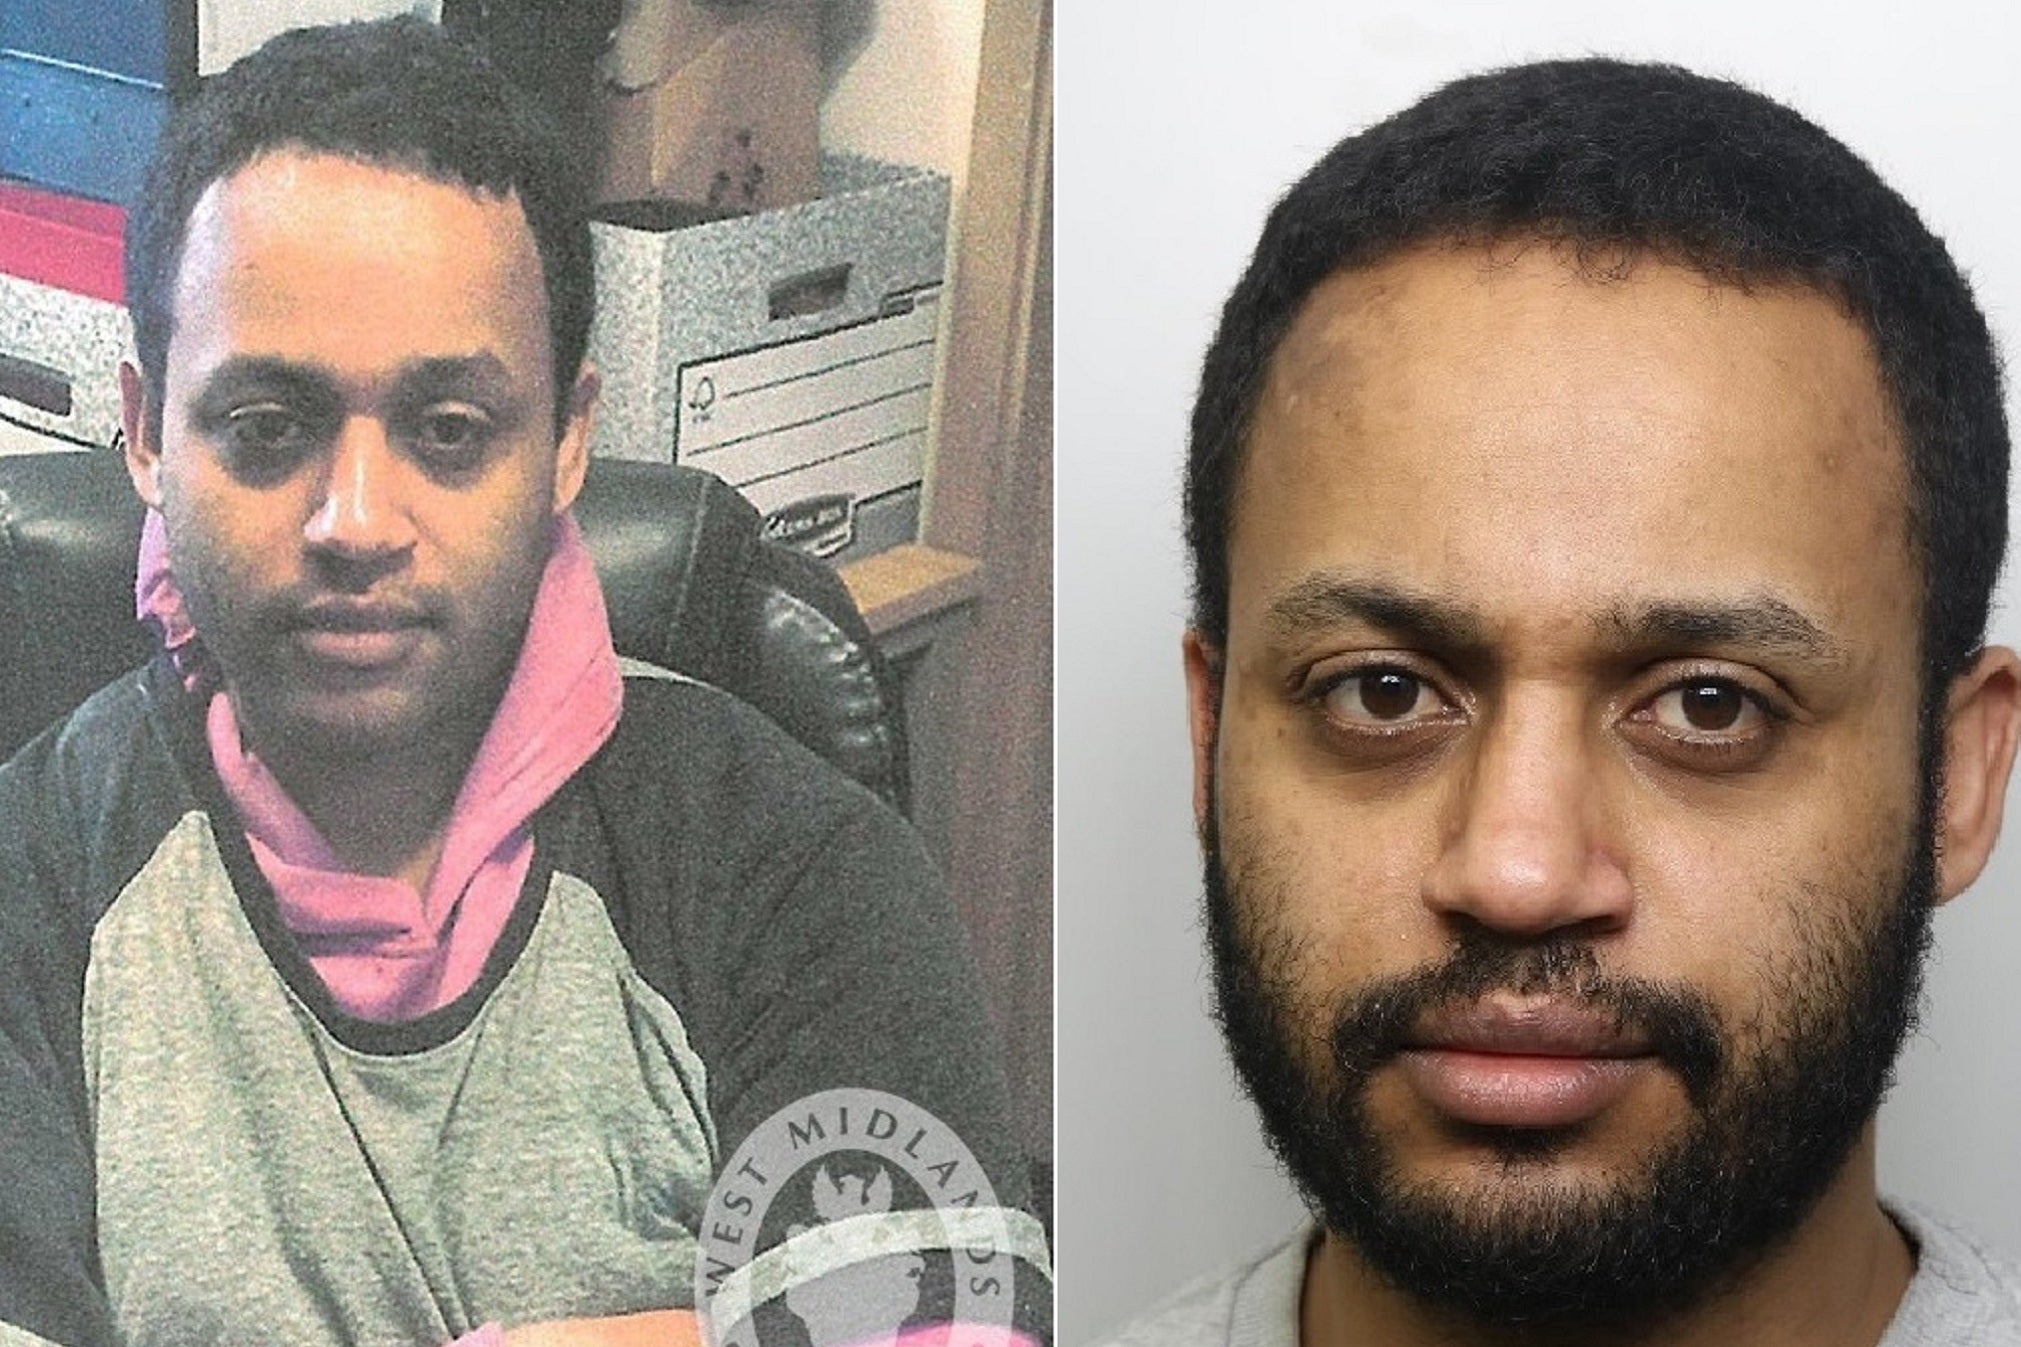 Temesgen Desta, 32, has been convicted of rape, intent to commit rape and two counts of false imprisonment after attacks on two women in Birmingham and Merseyside on 14 and 15 March 2019.